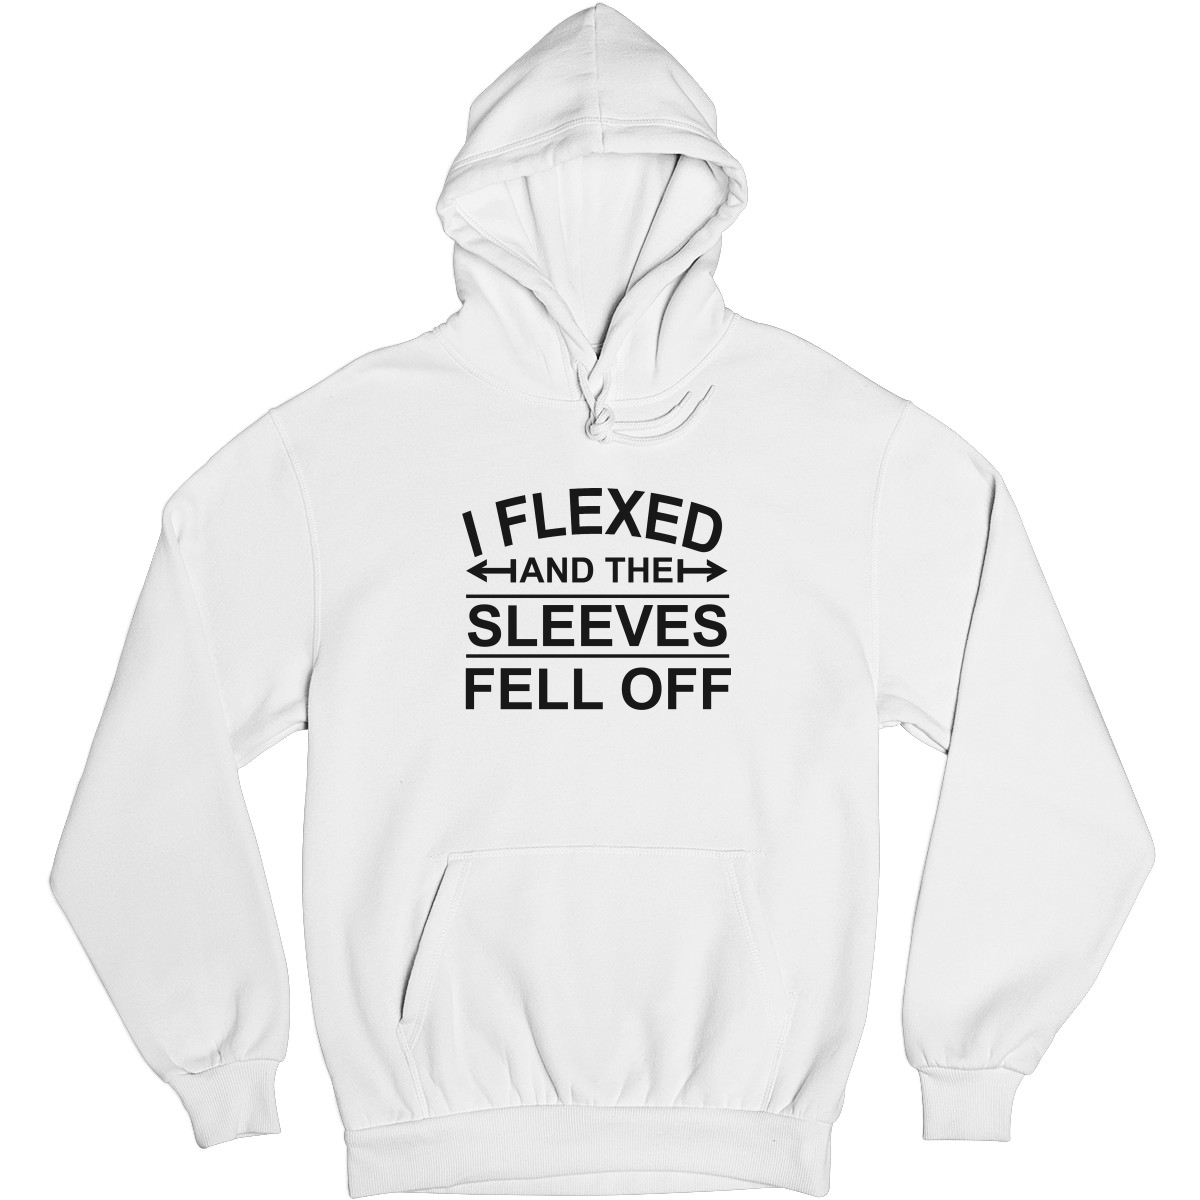 I Flexed and the sleeves fell off Unisex Hoodie | White